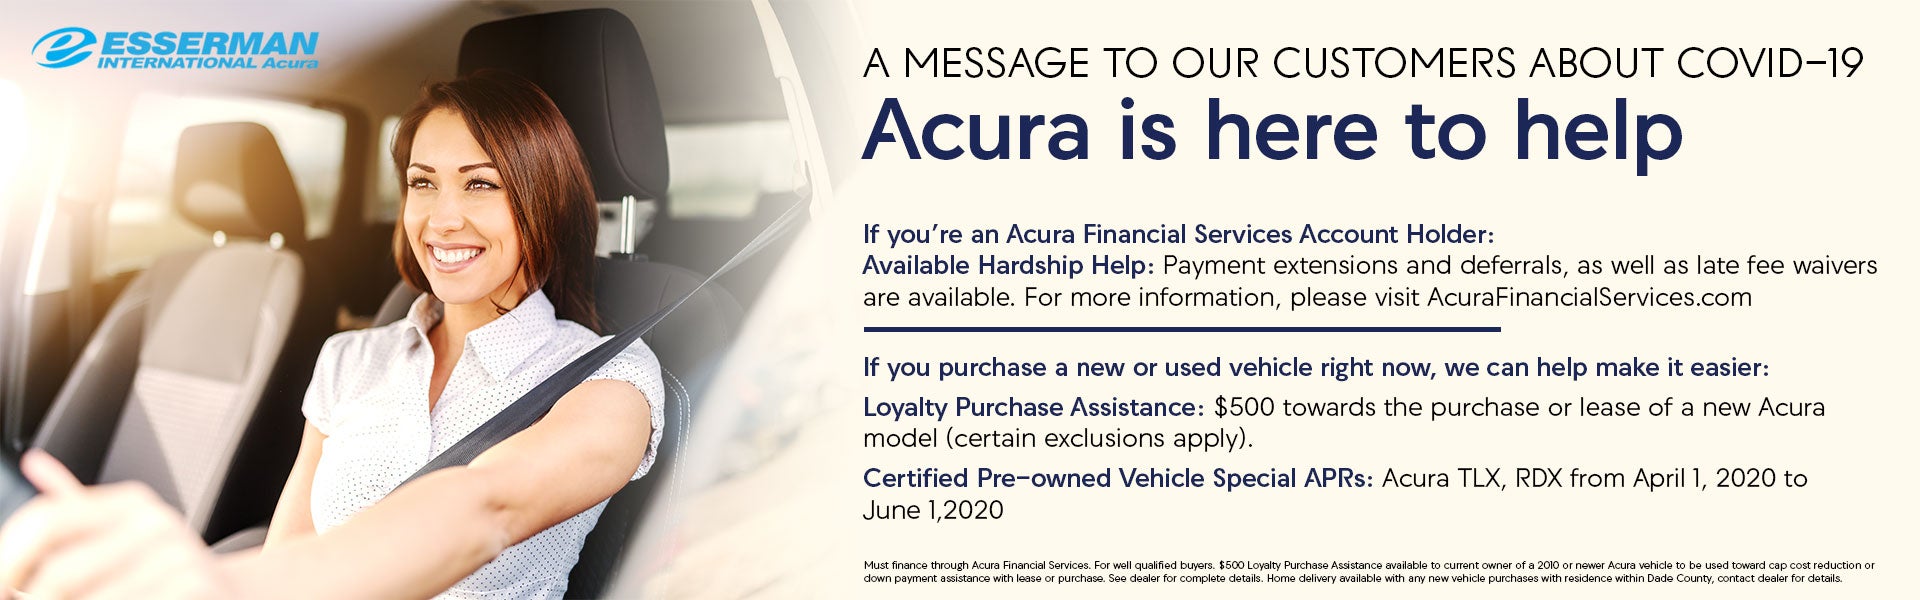 Acura is Here to Help